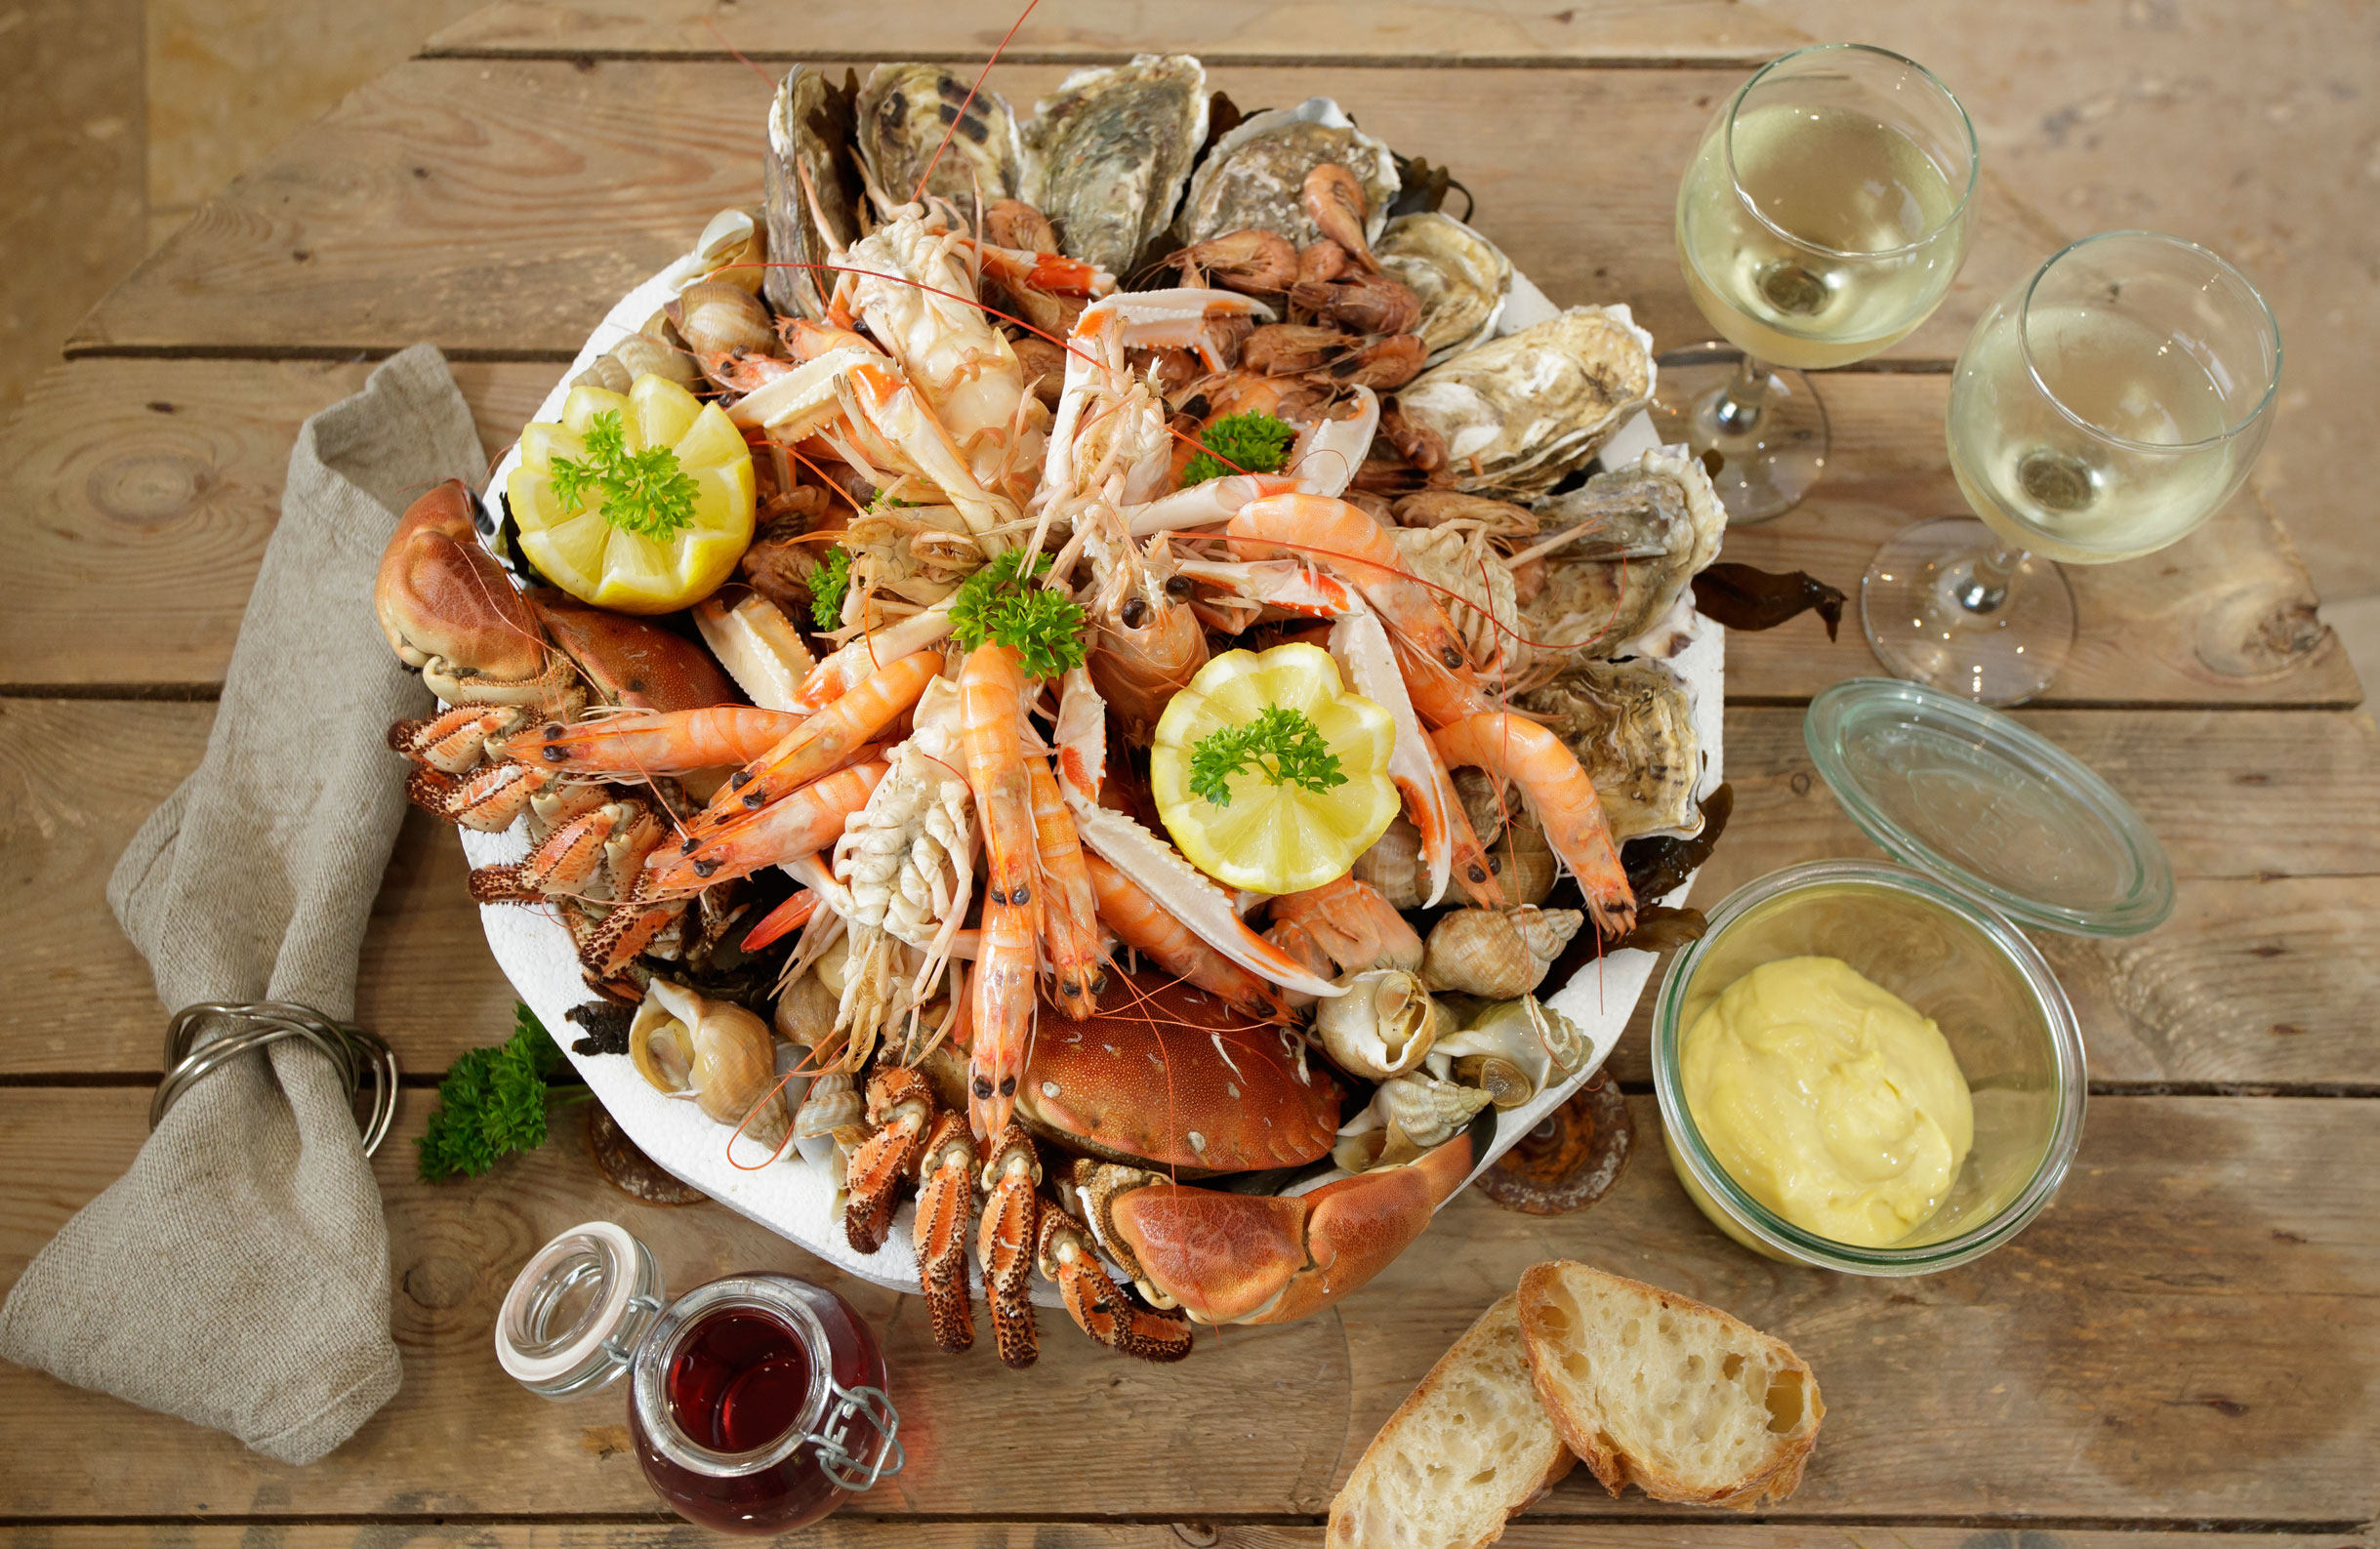 A mouthwatering seafood platter is included in your stay at Le Clos de Marenla cottage in Northern France